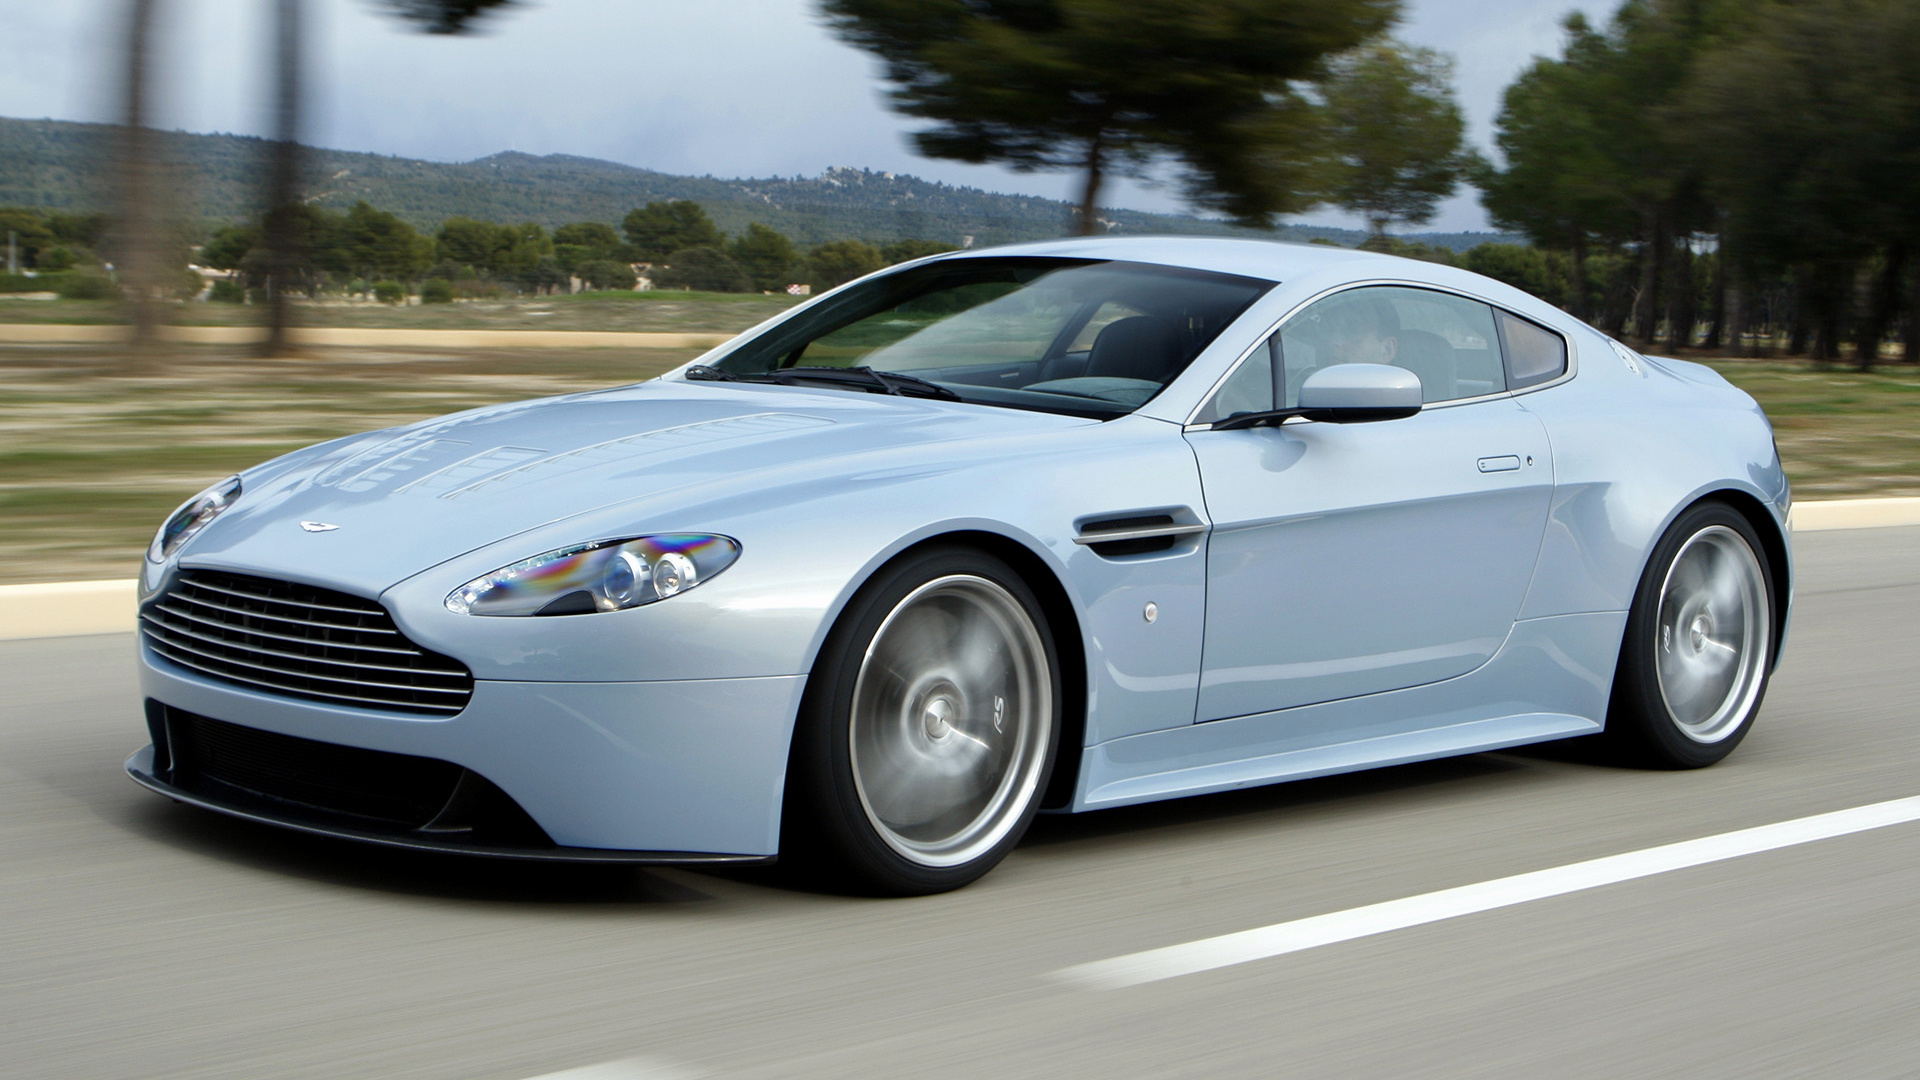 Aston Martin V12 Vantage RS Concept (2007) Wallpapers and HD Images ...